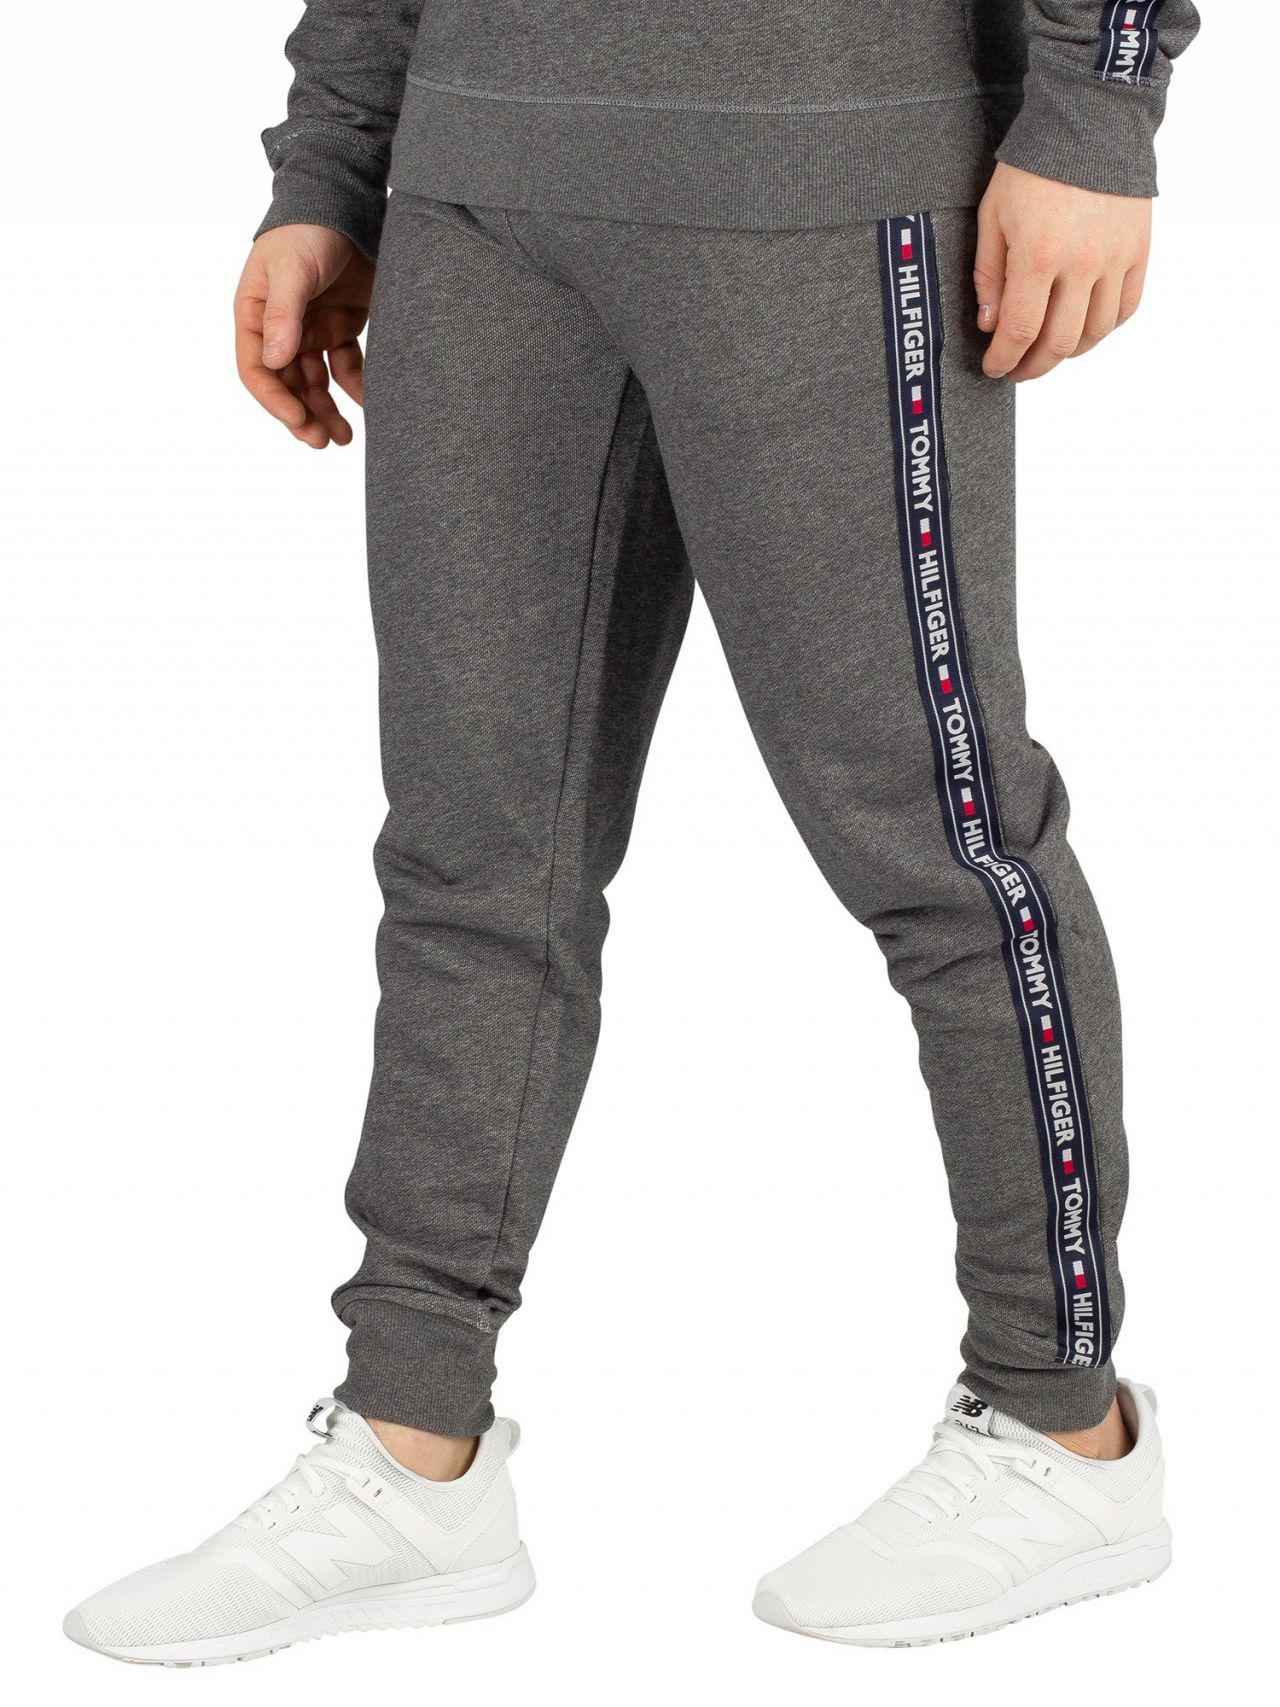 Lyst - Tommy Hilfiger Dark Grey Heather Track Joggers in Gray for Men